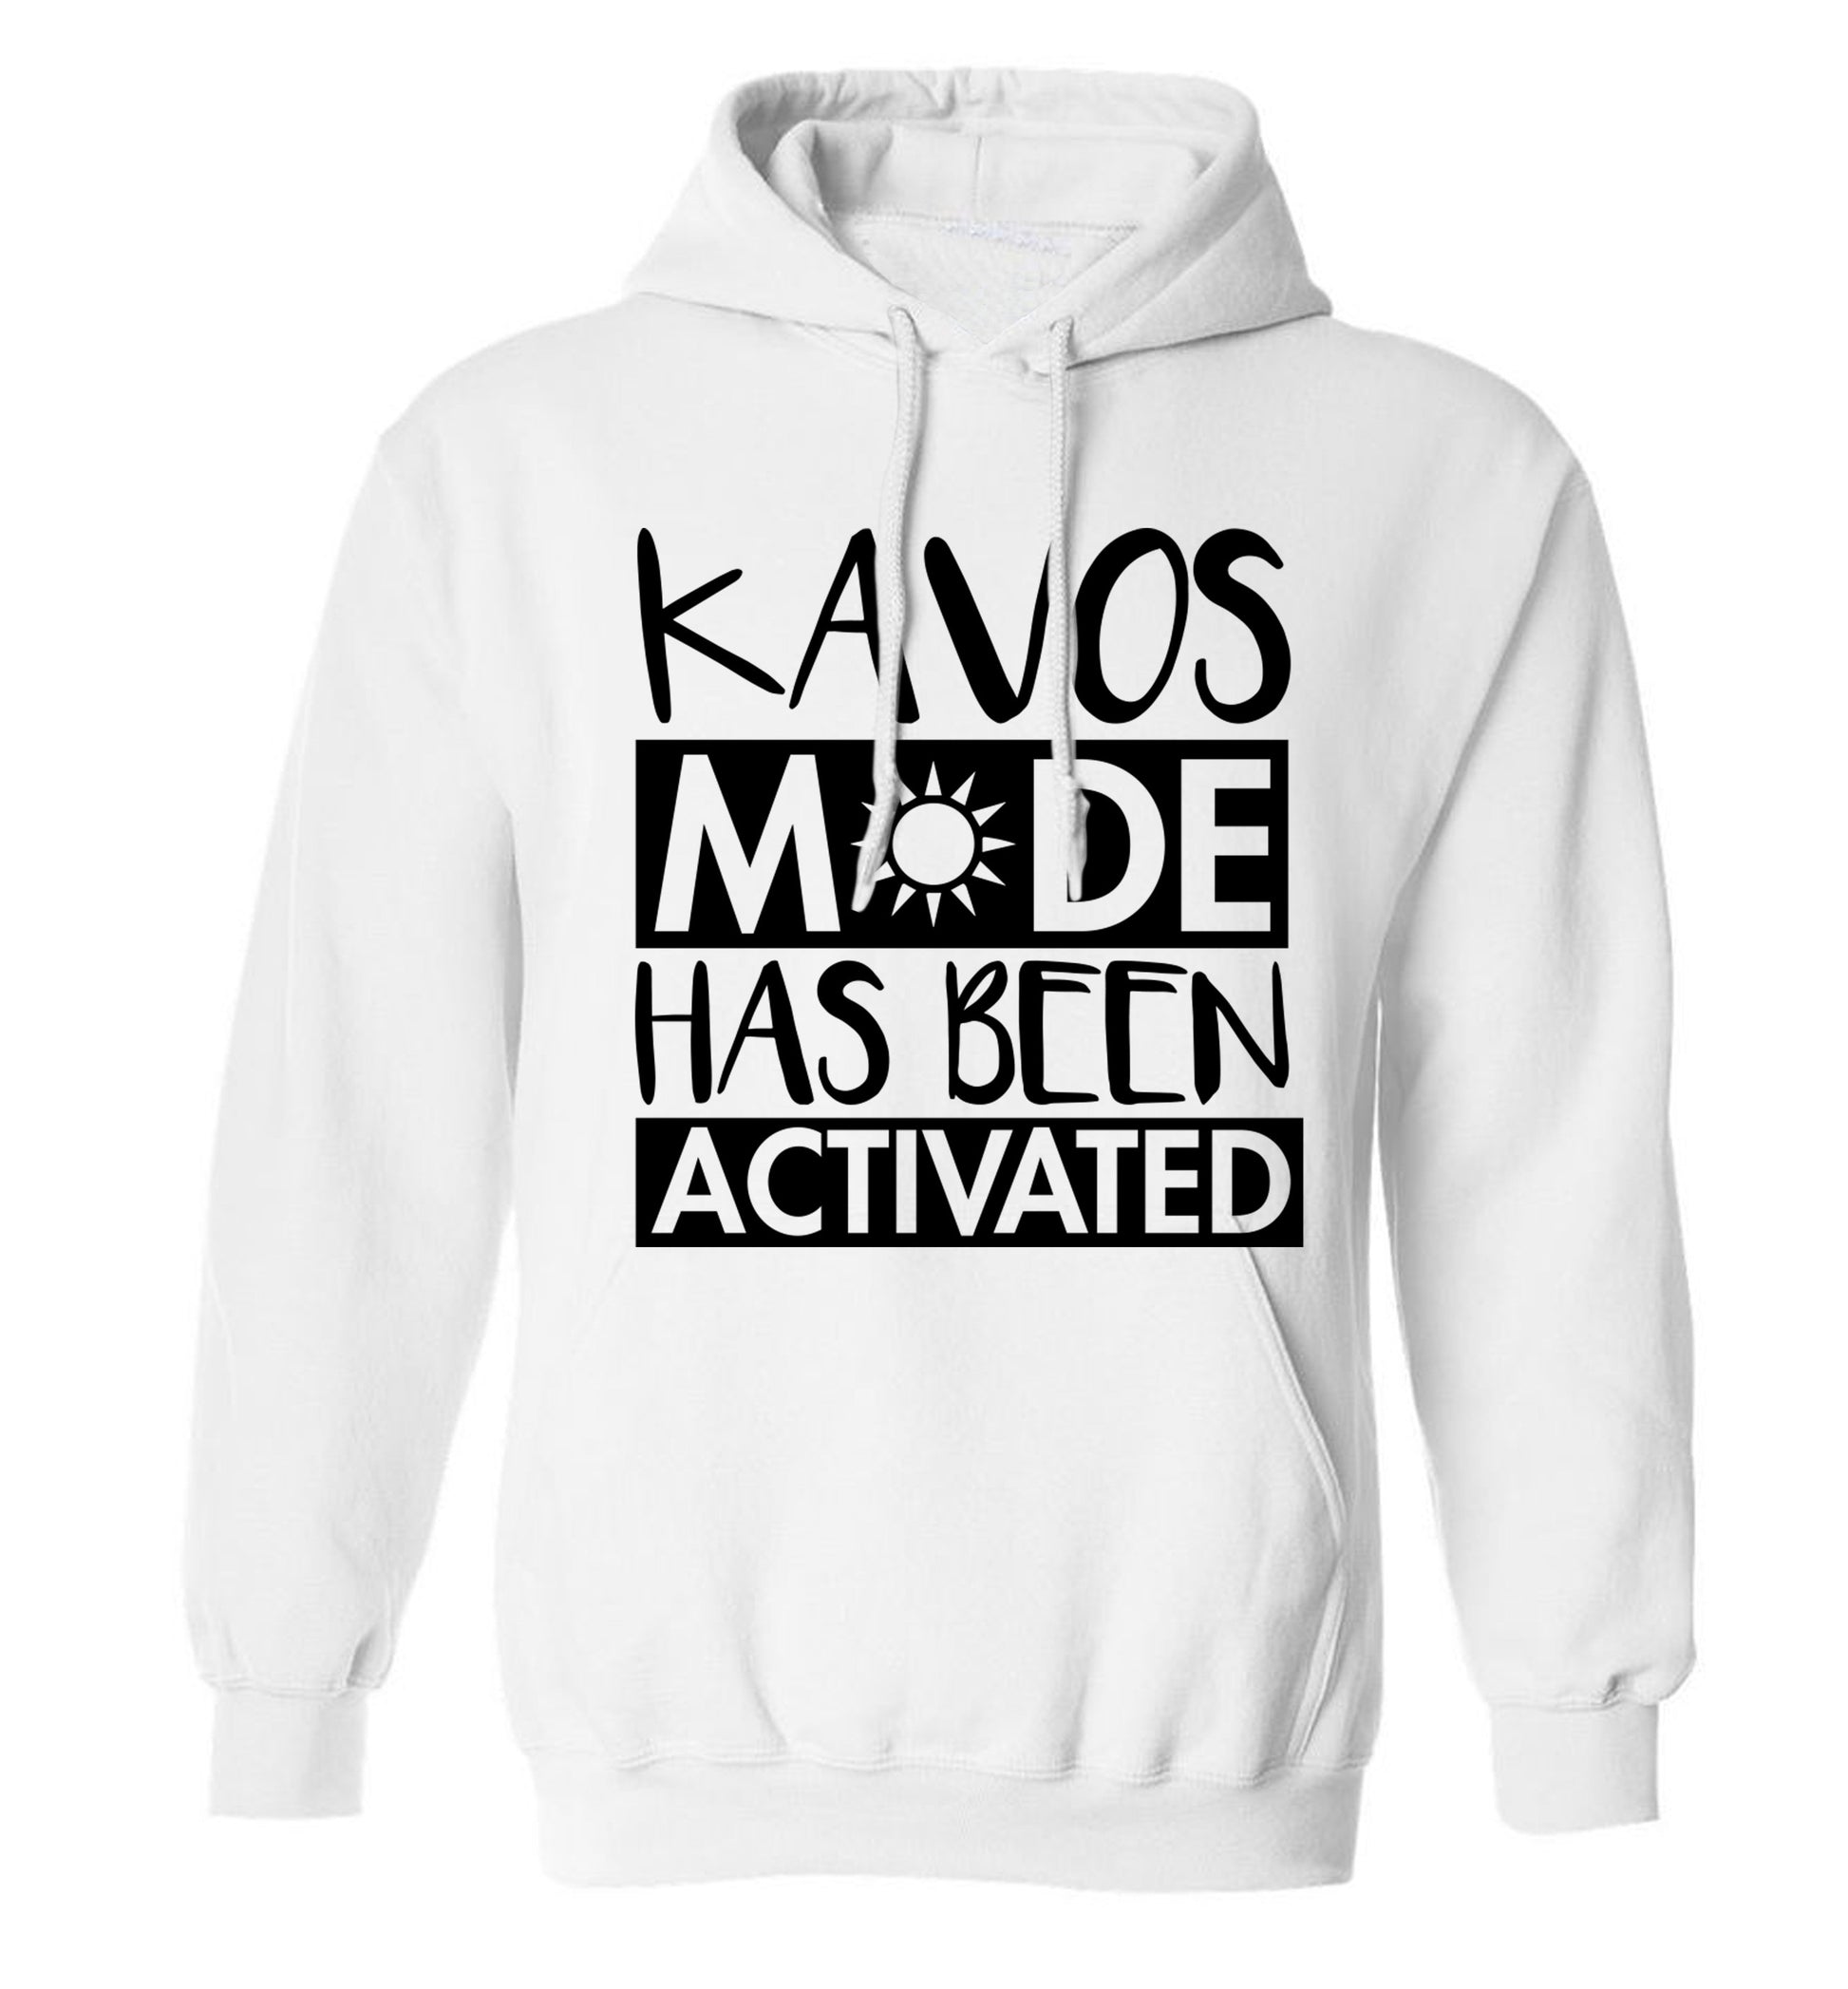 Kavos mode has been activated adults unisex white hoodie 2XL